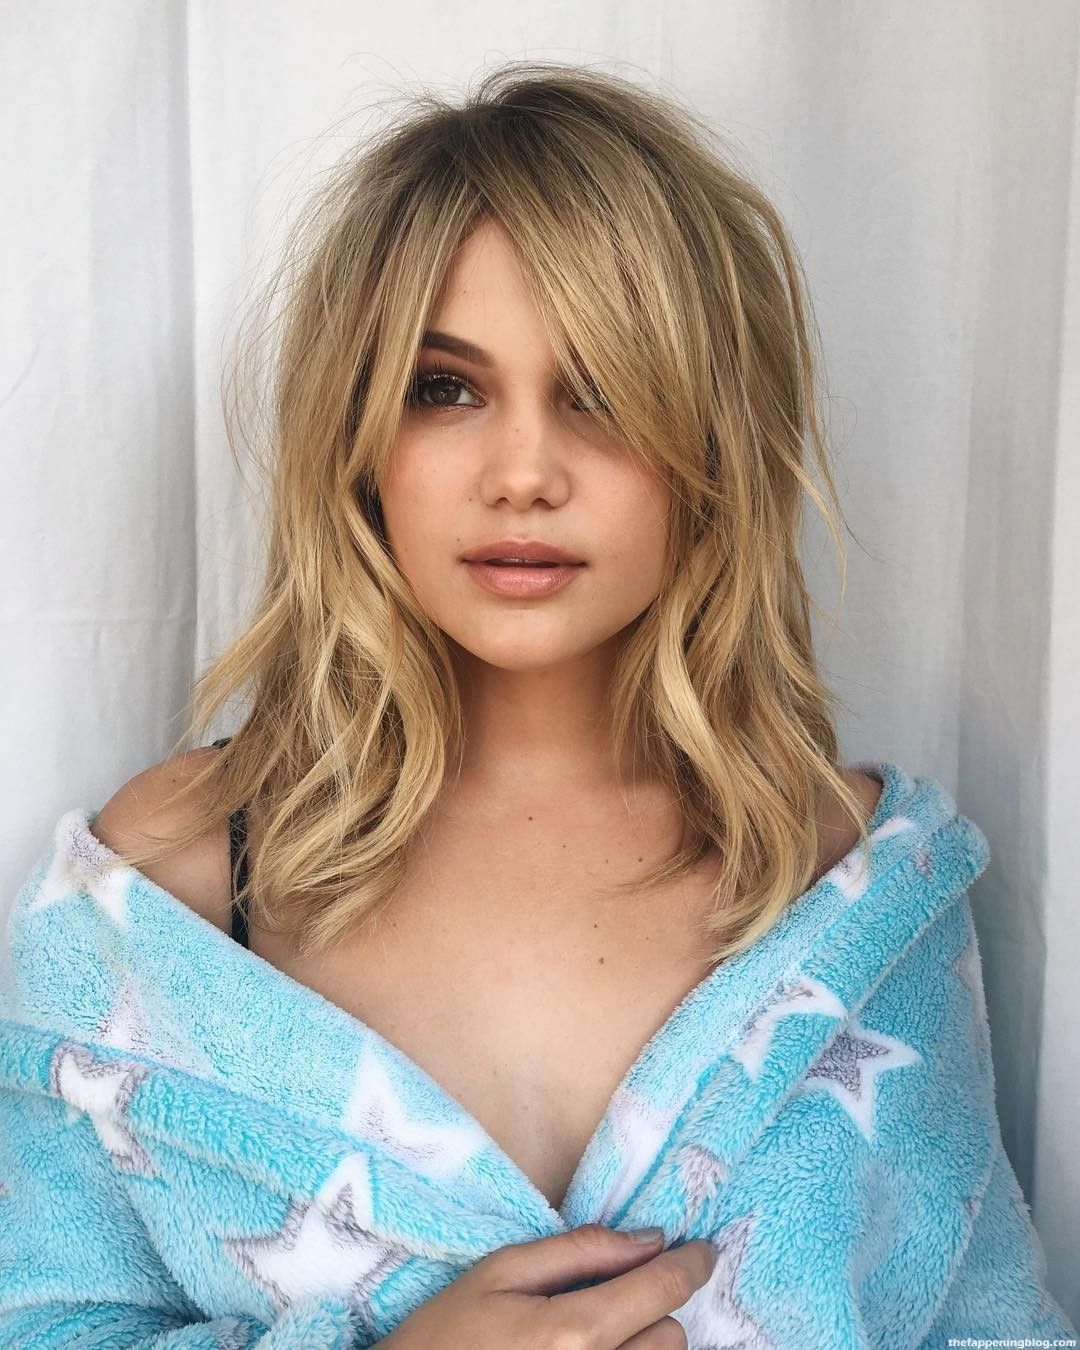 sexiest-photos-of-olivia-holt-that-you-never-seen-before-26-thefappeningblog.com1_.jpg